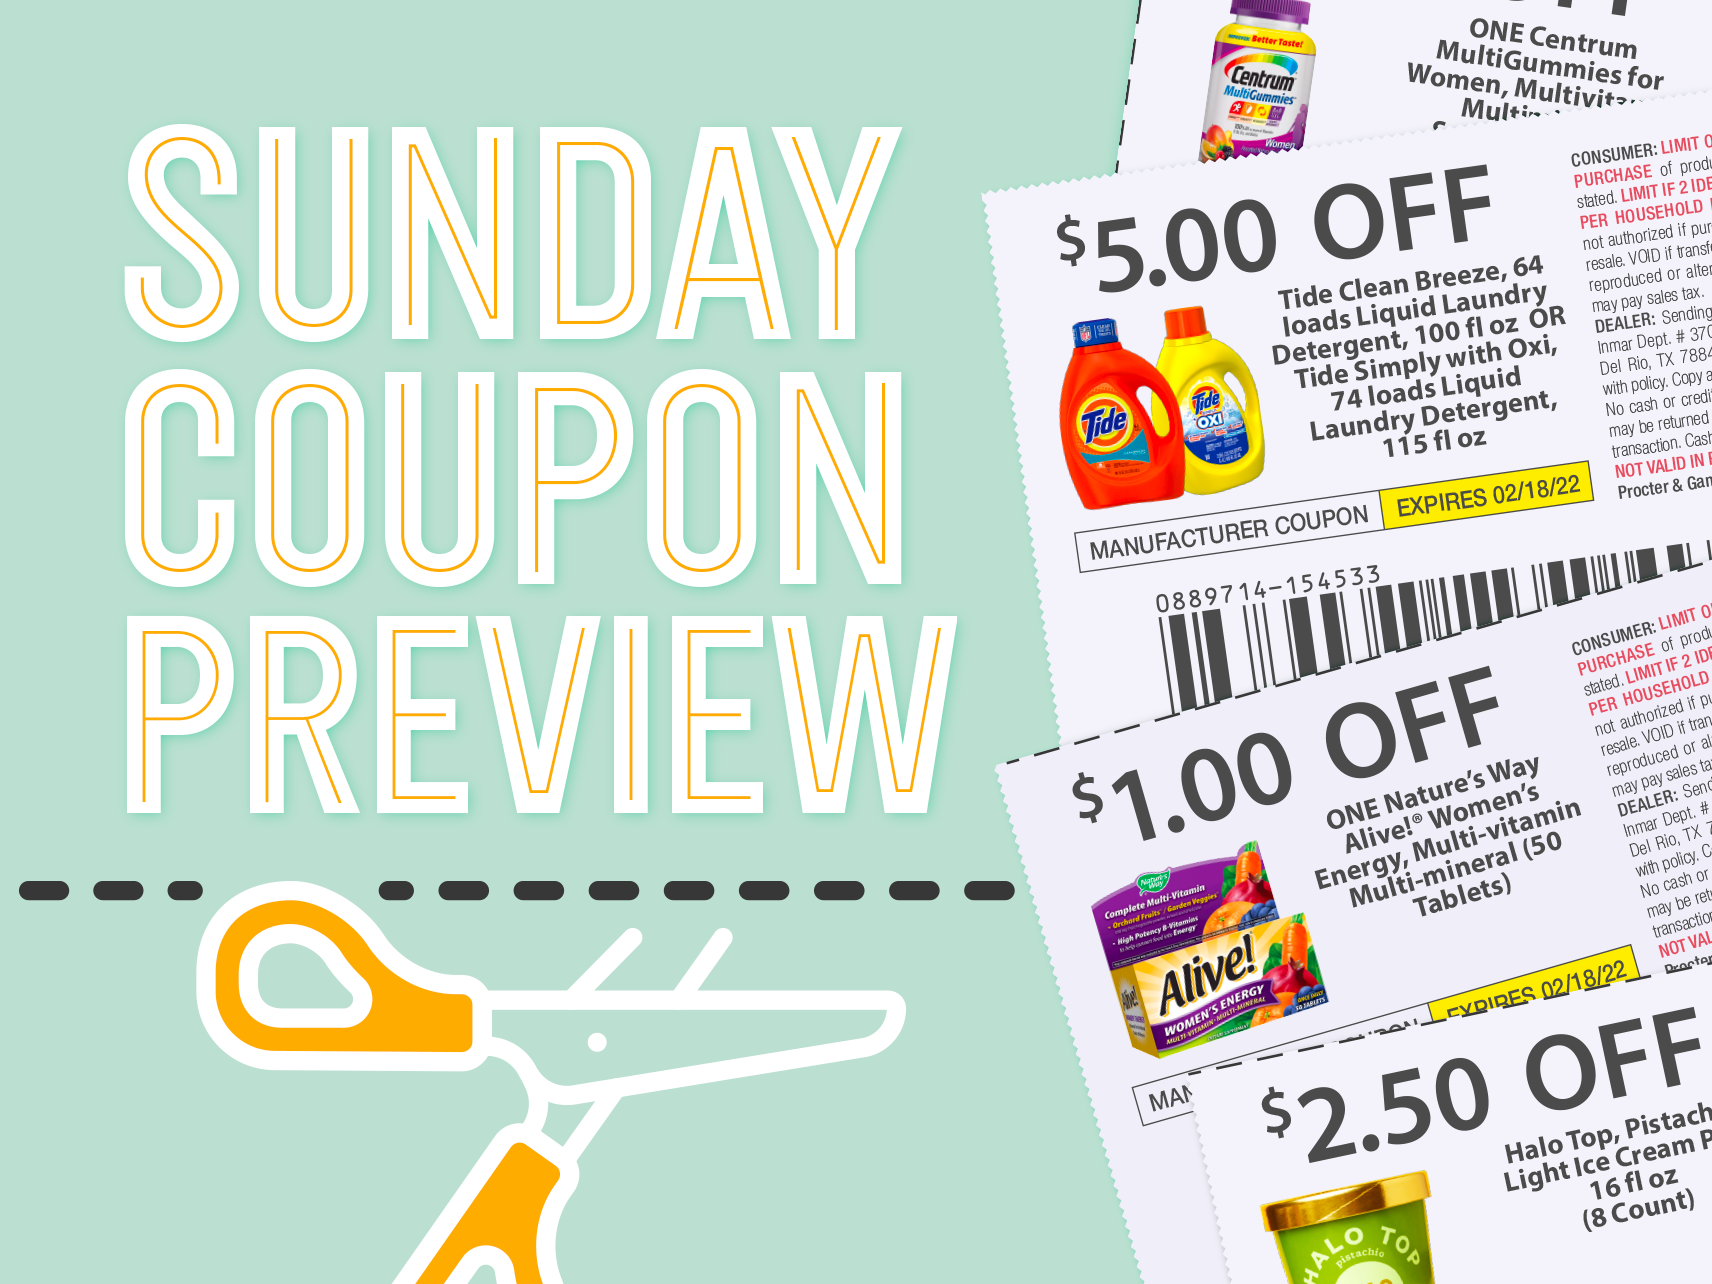 Sunday Coupon Preview For 5/22 – Two Inserts